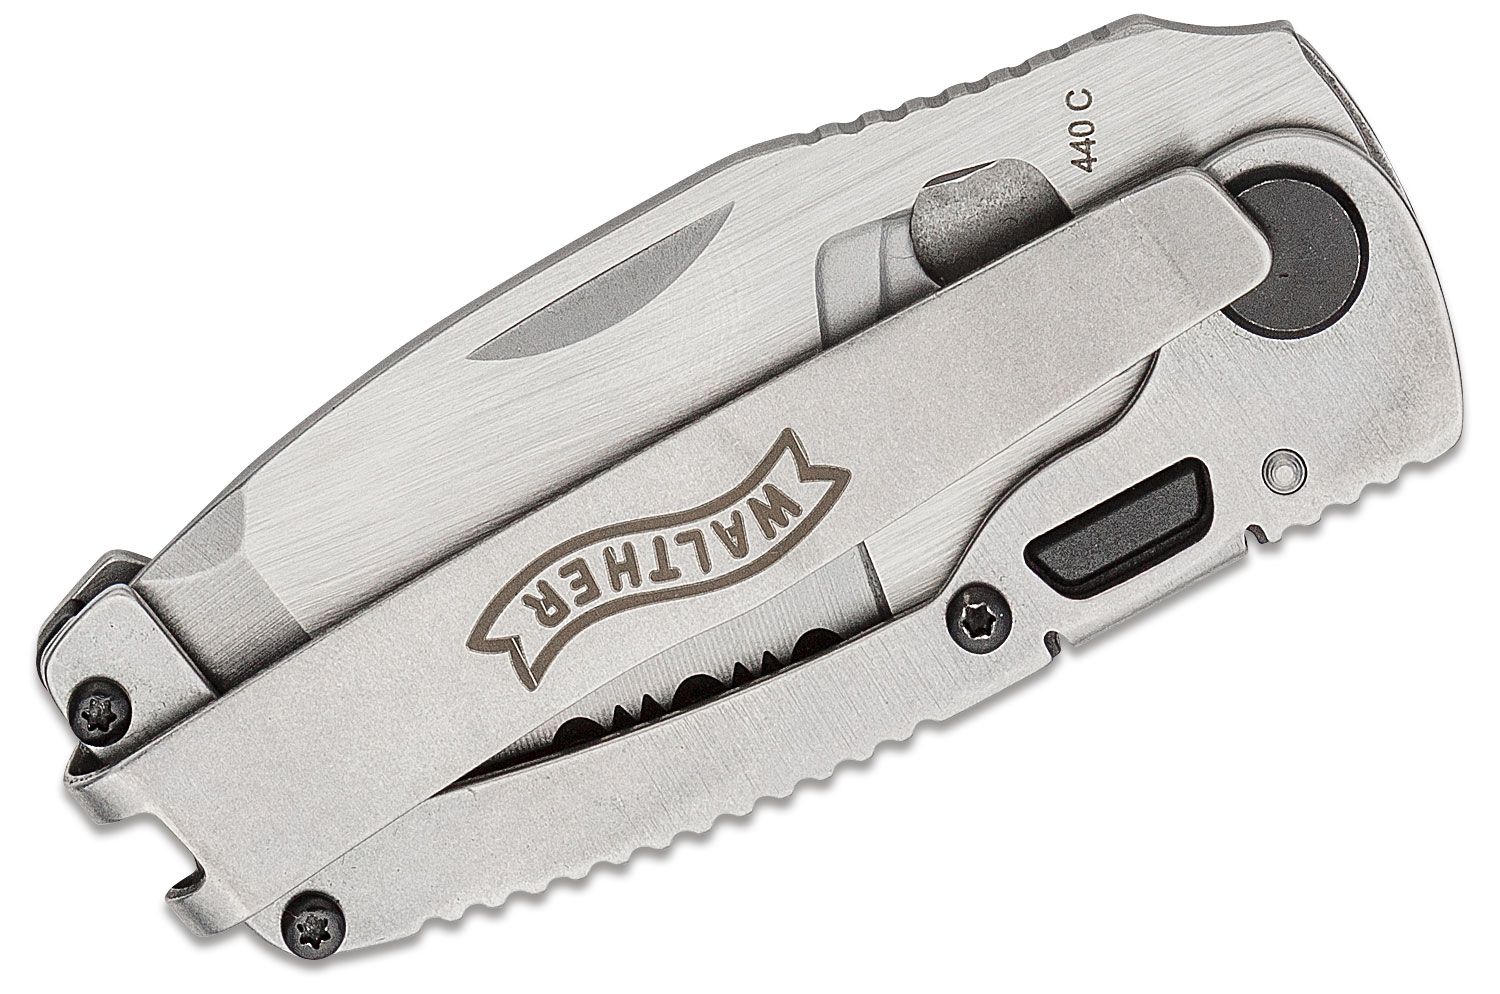 Walther CFK Chisel Frame Lock Folding Knife 2.44 Two-Tone Tanto Combo  Blade, Stonewashed Skeletonized Stainless Steel Handles, Nylon Pouch -  KnifeCenter - 5.0795-US